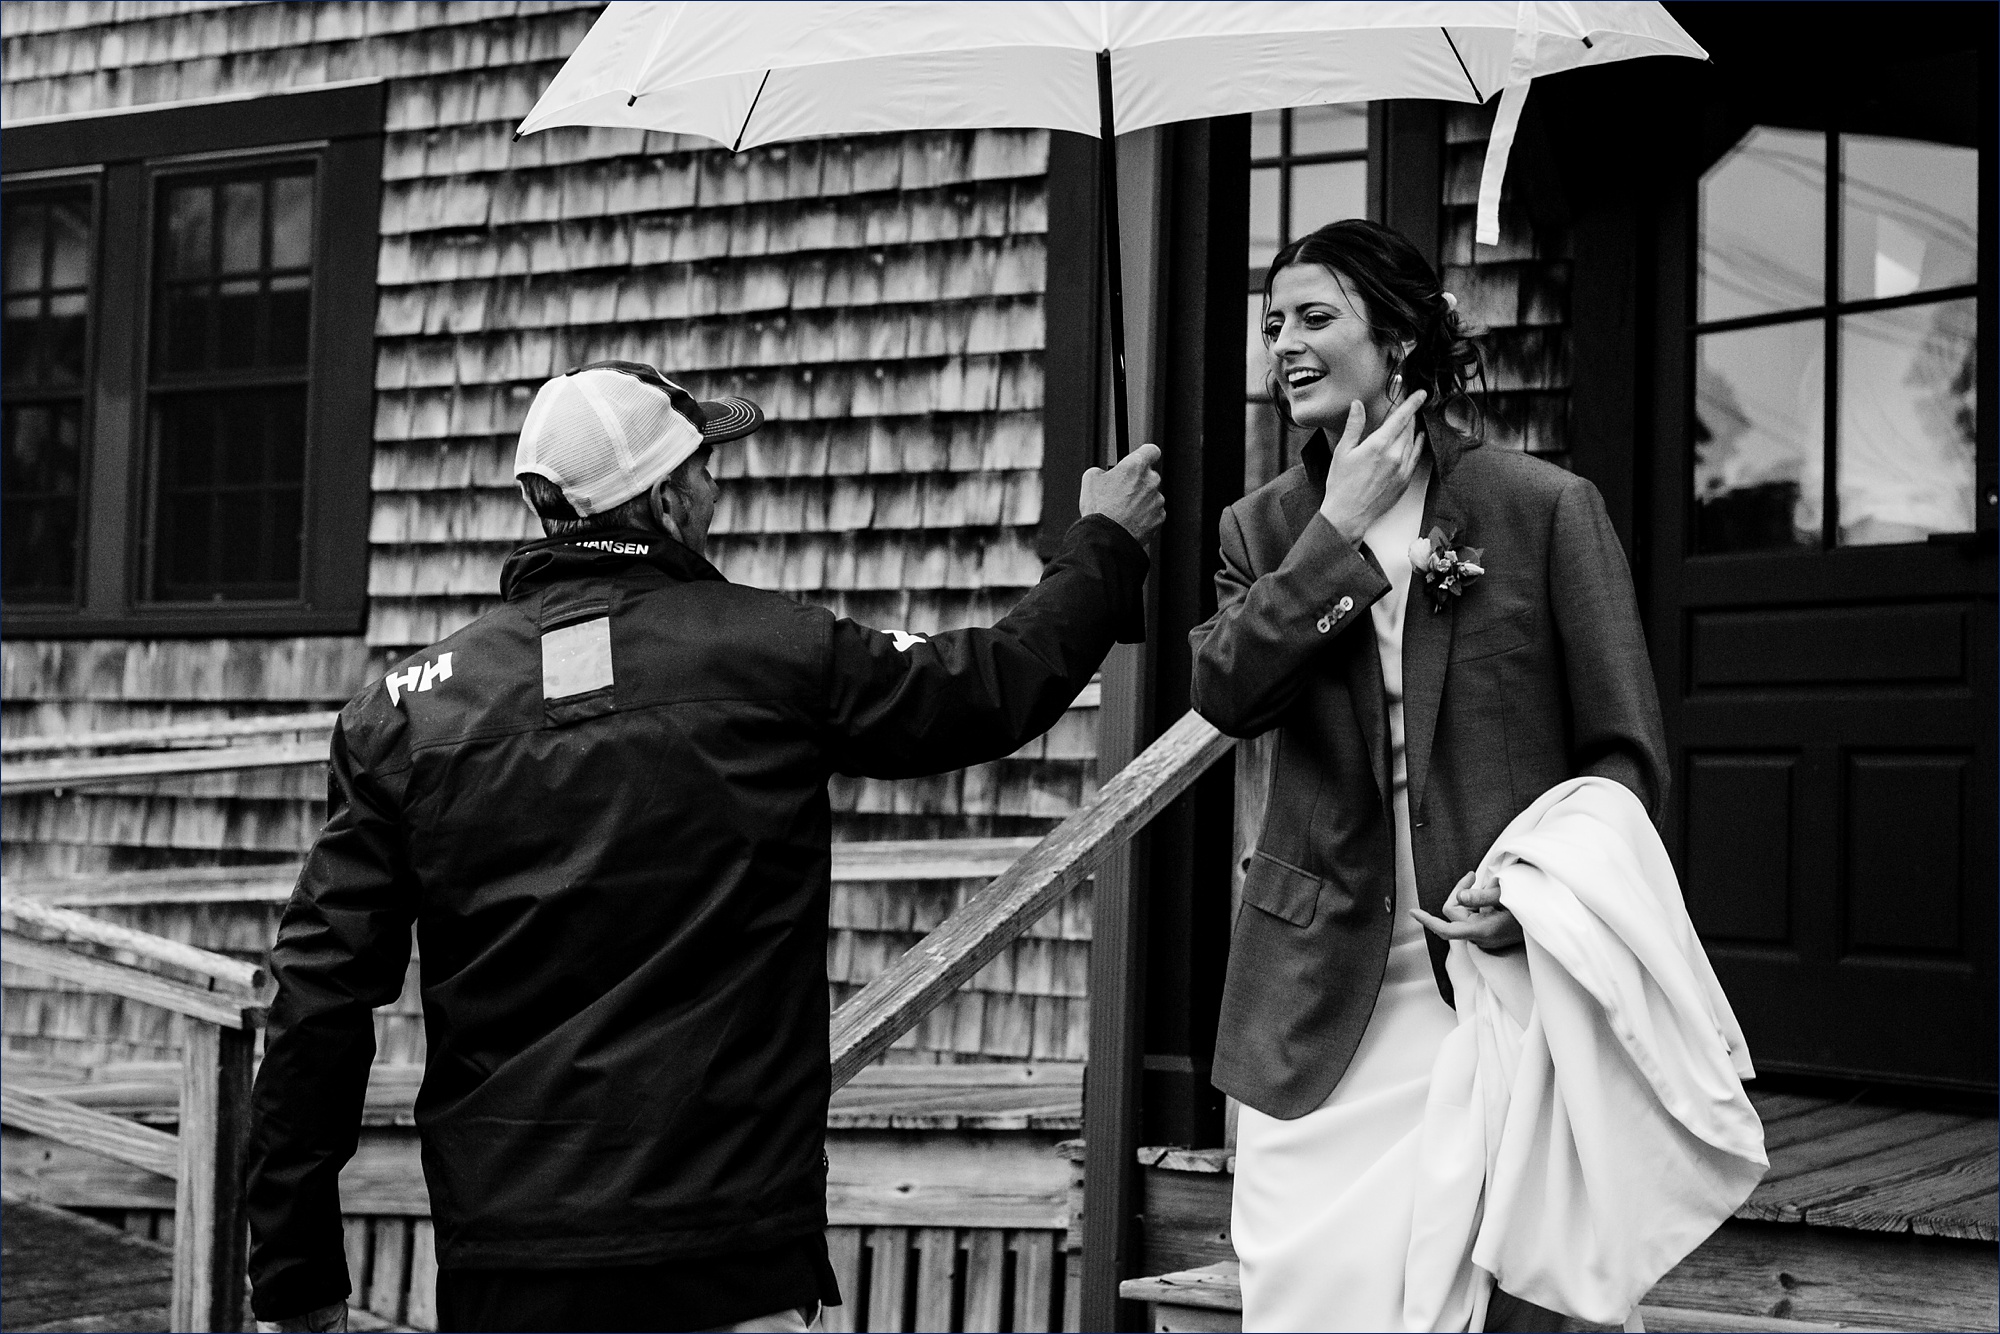 The bride throws on the groom's suit coat and gets a little help from a guest with an umbrella